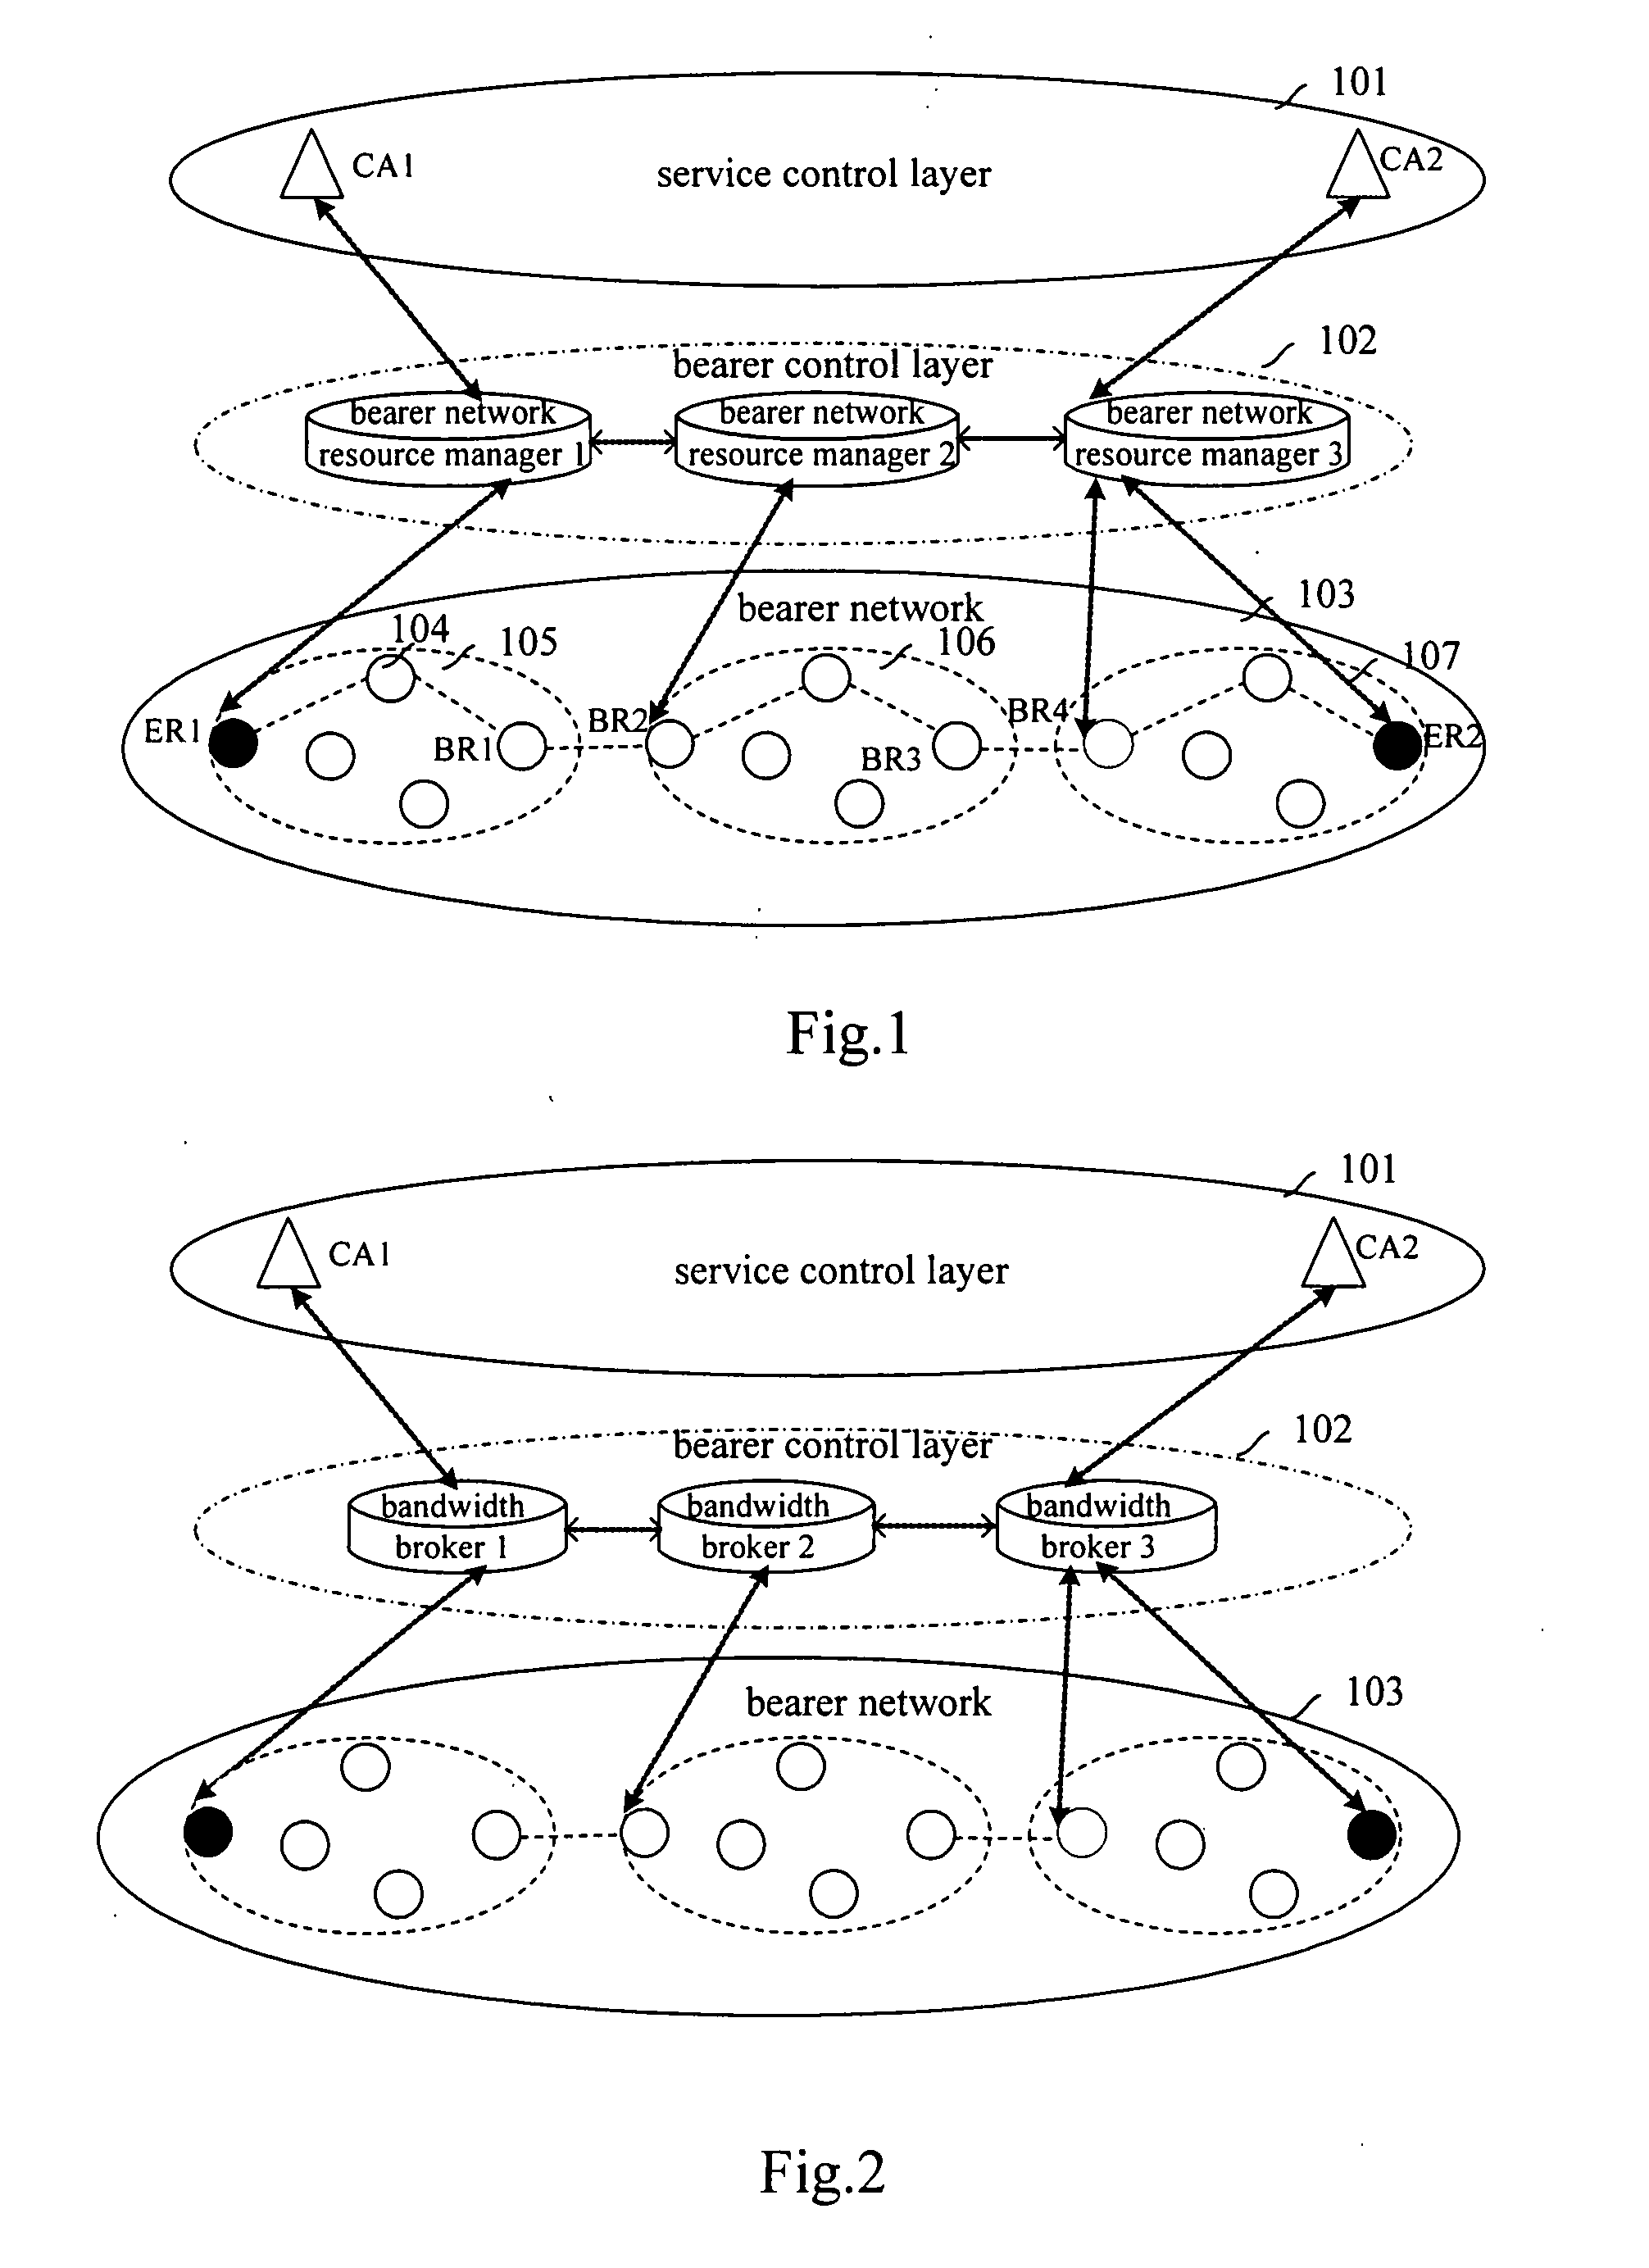 Method For Selecting Real-Time Service Data Transmission Path